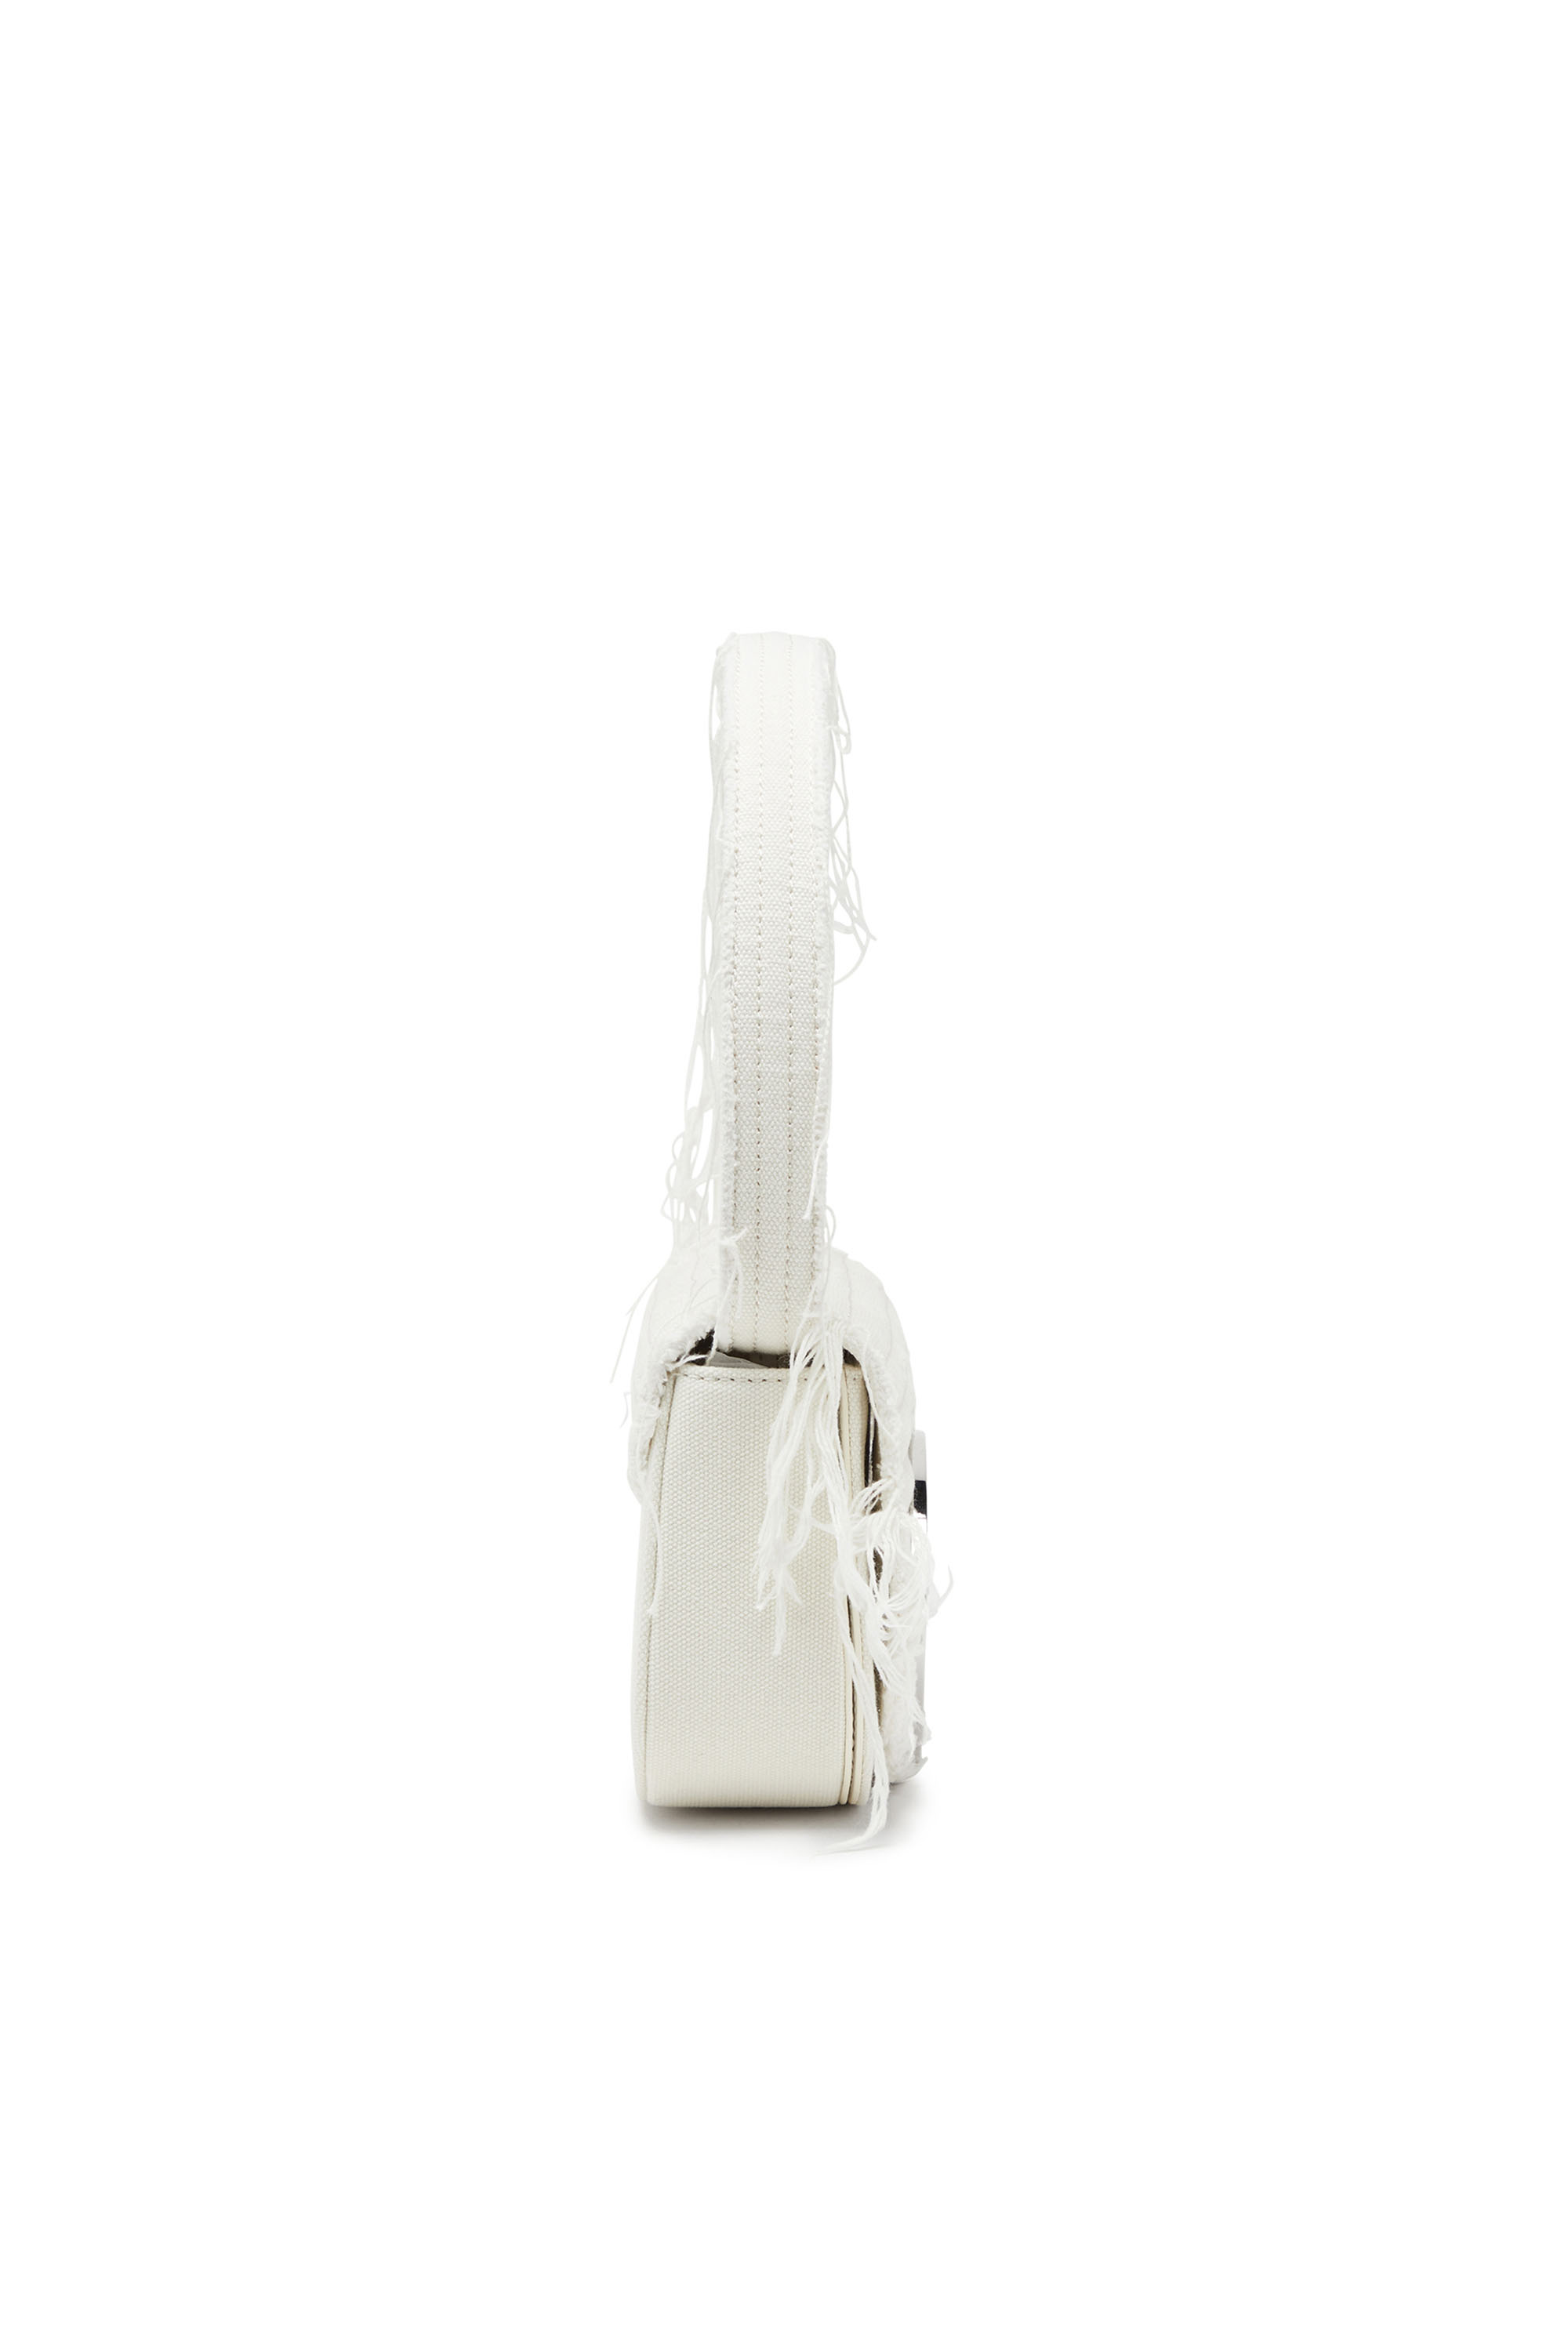 Diesel - 1DR, Female 1DR-Iconic shoulder bag in canvas and leather in ホワイト - Image 3